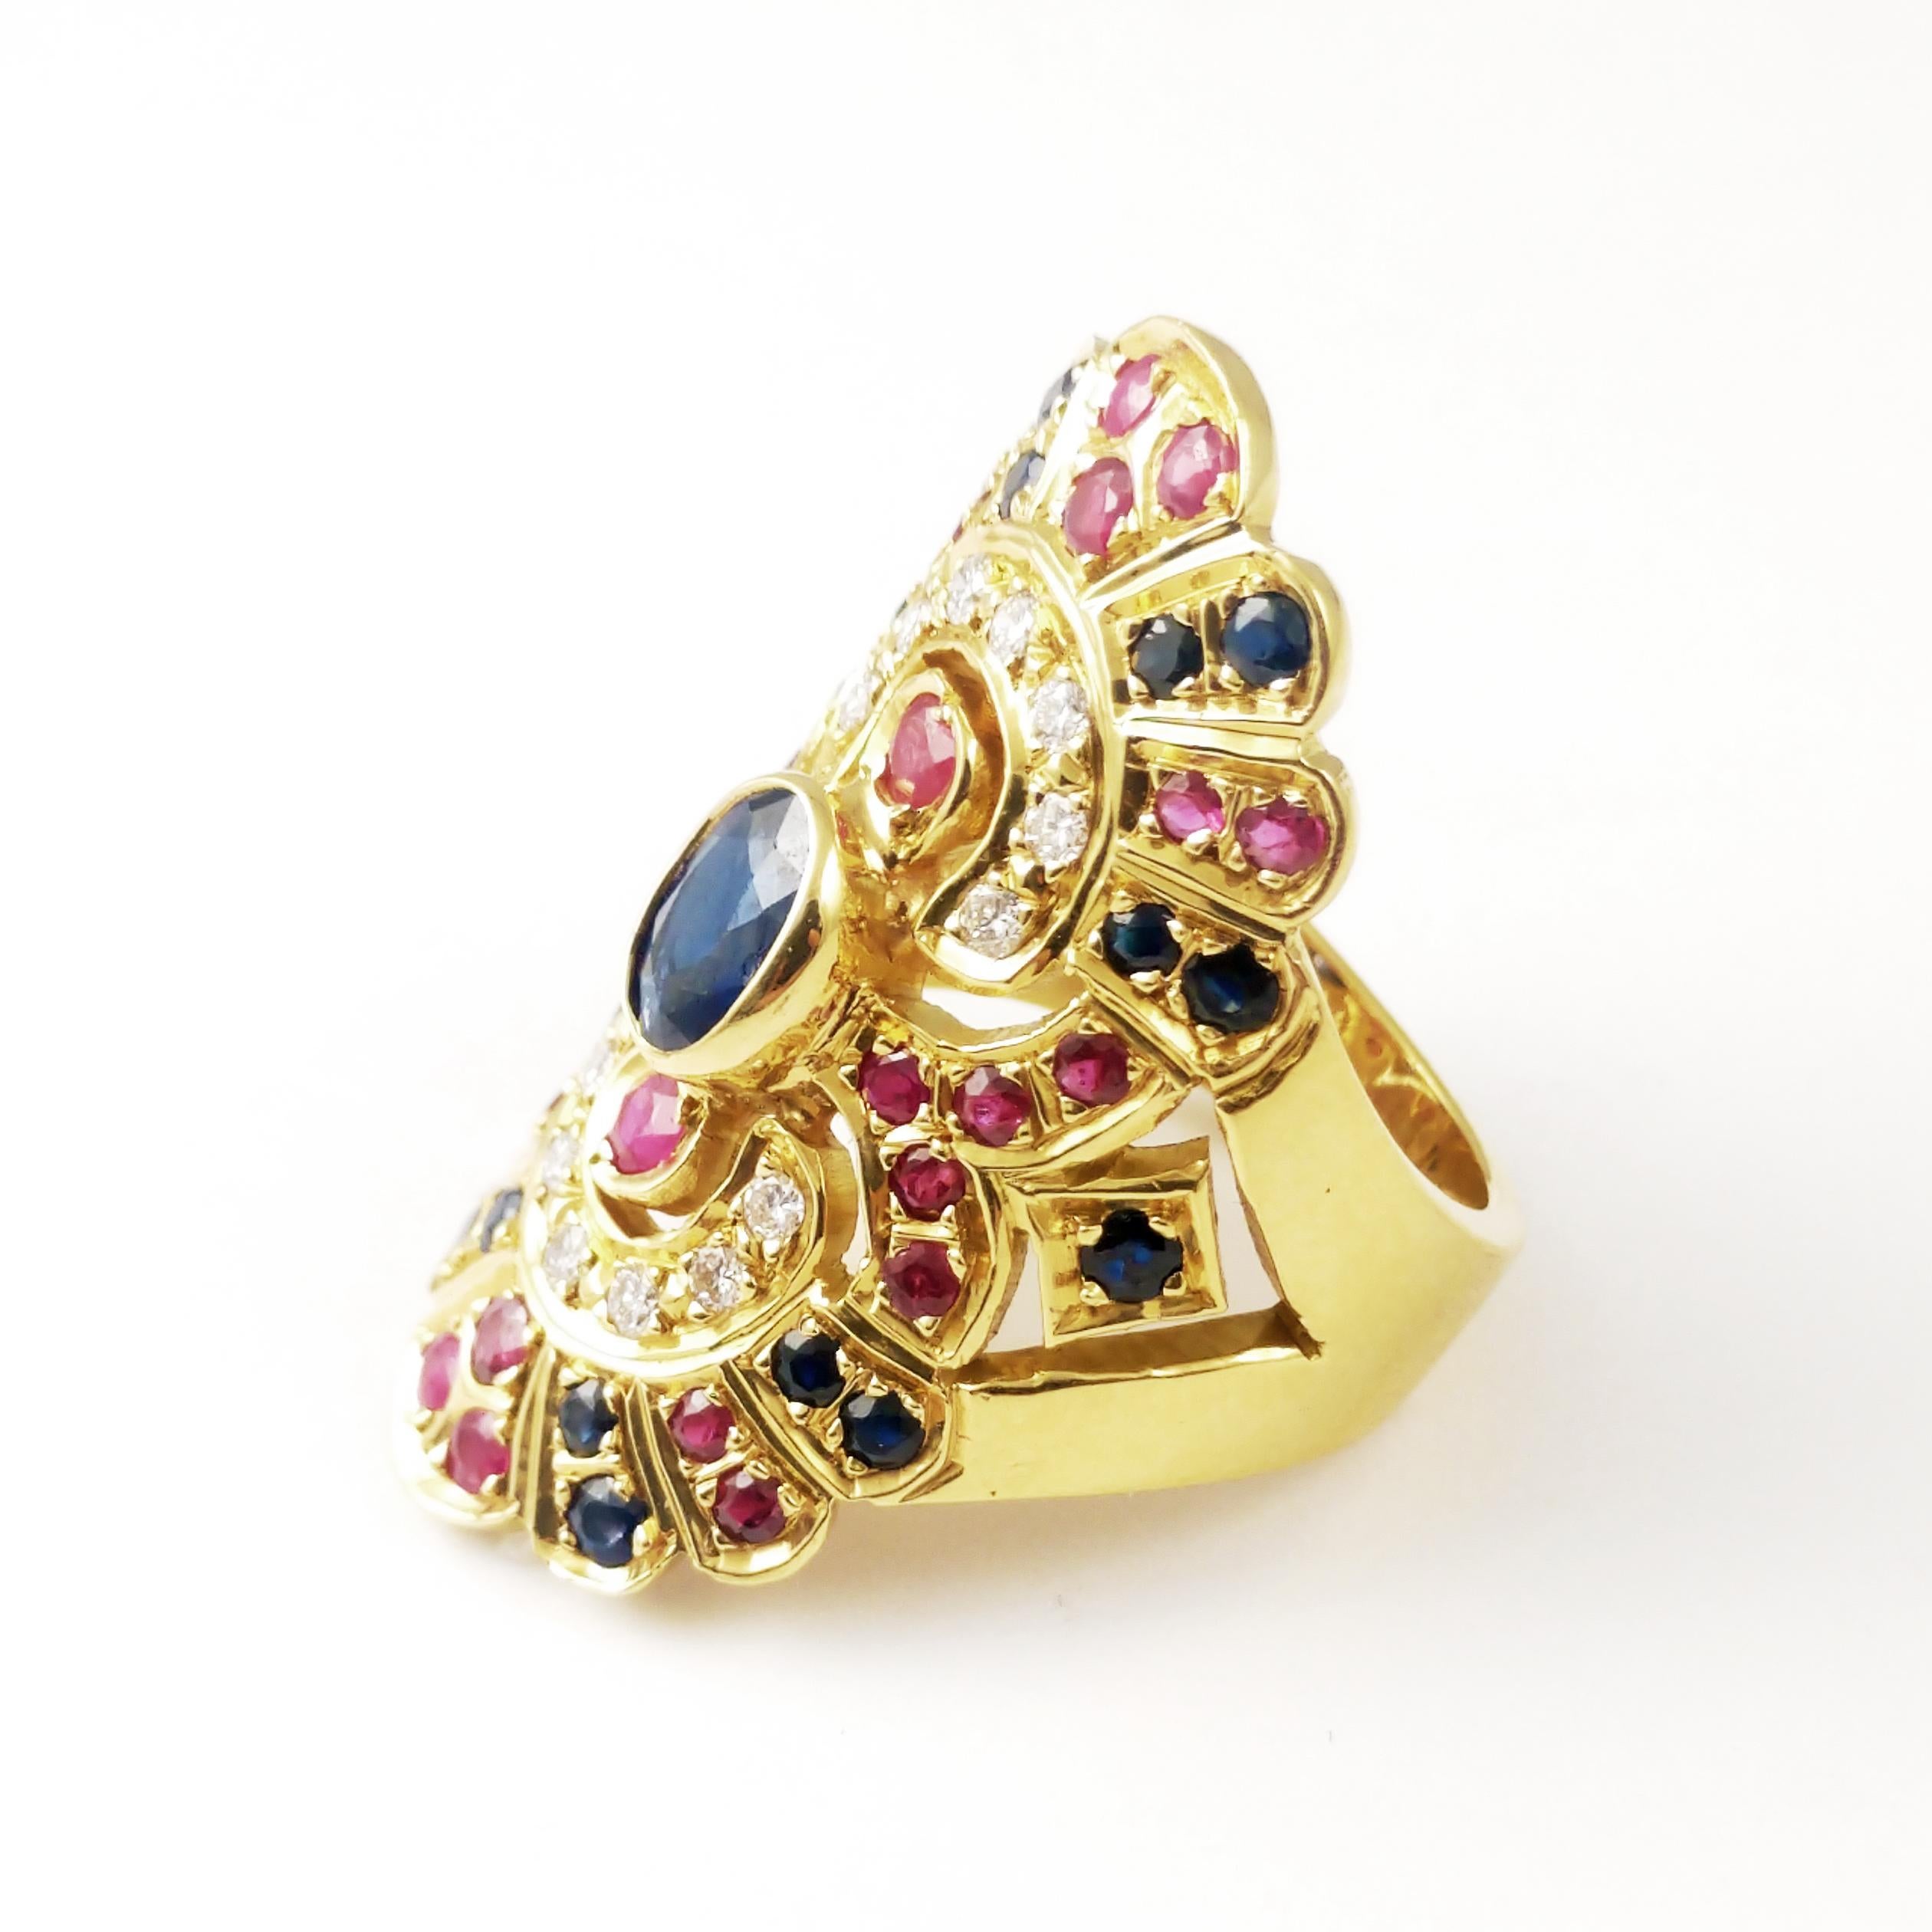 This ethnic and trendy ring features oval blue sapphire surrounded by blue sapphire rubies and diamonds. This ring is great for Anniversary, Engagement, Party, or Wedding gift. The finger size is currently a 7 but can be adjusted to fit any finger.